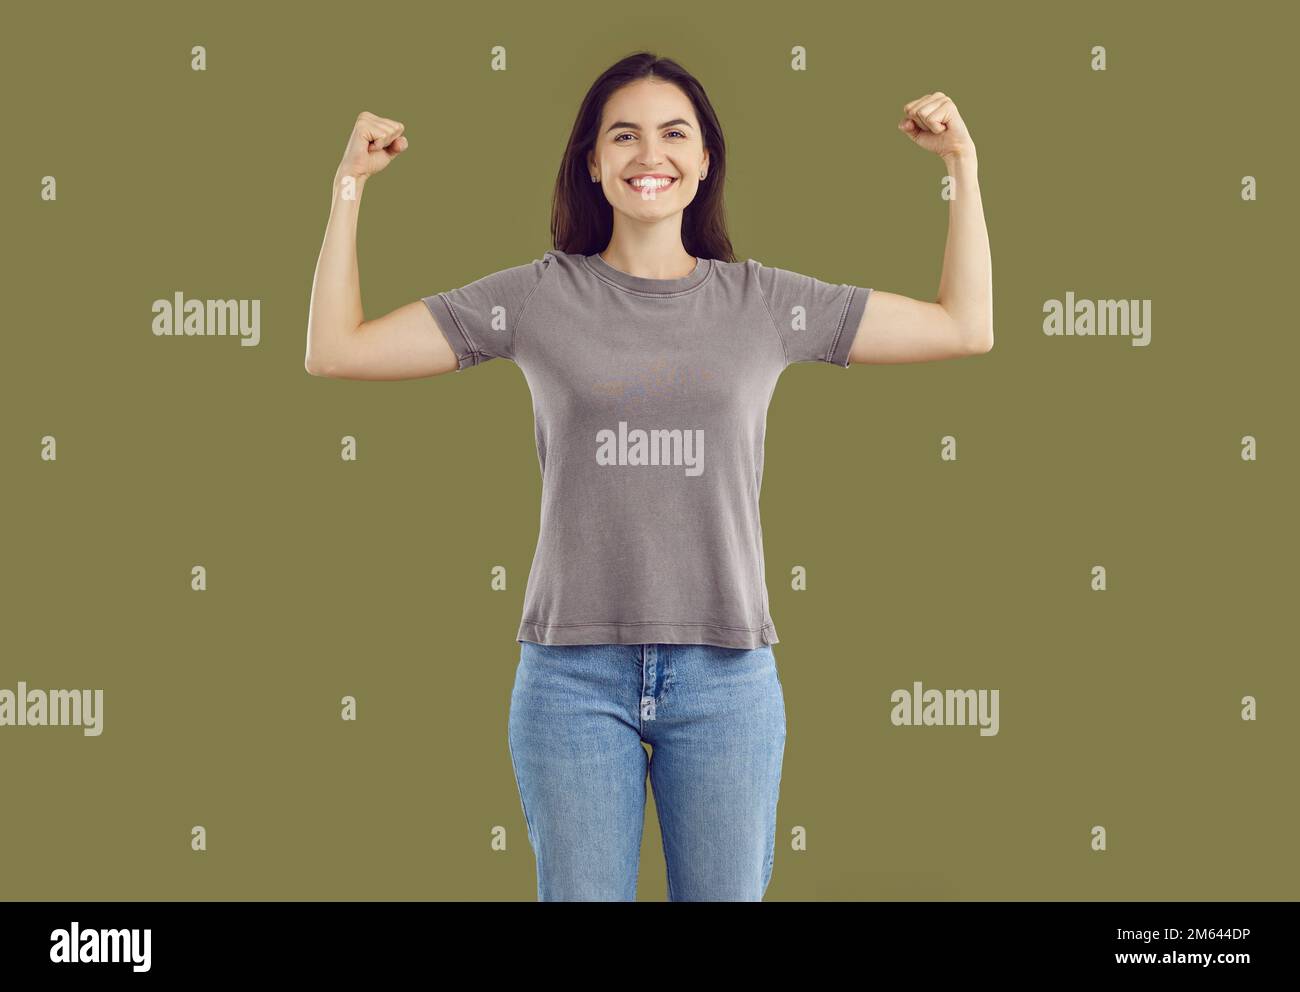 Smiling strong powerful young woman showing her biceps Stock Photo